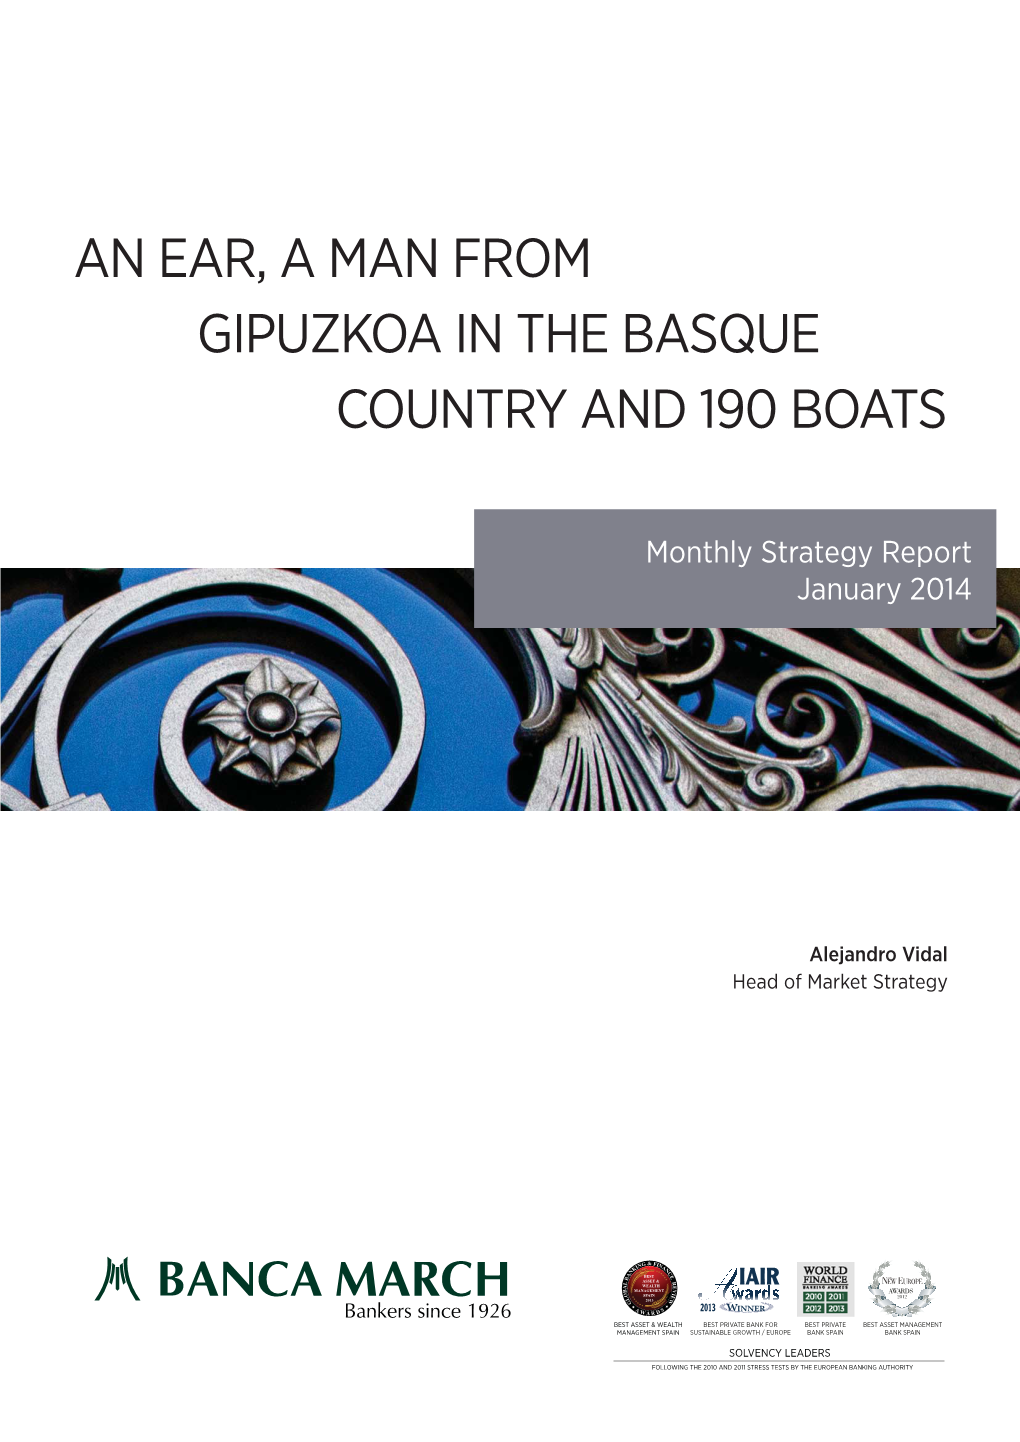 An Ear, a Man from Gipuzkoa in the Basque Country and 190 Boats